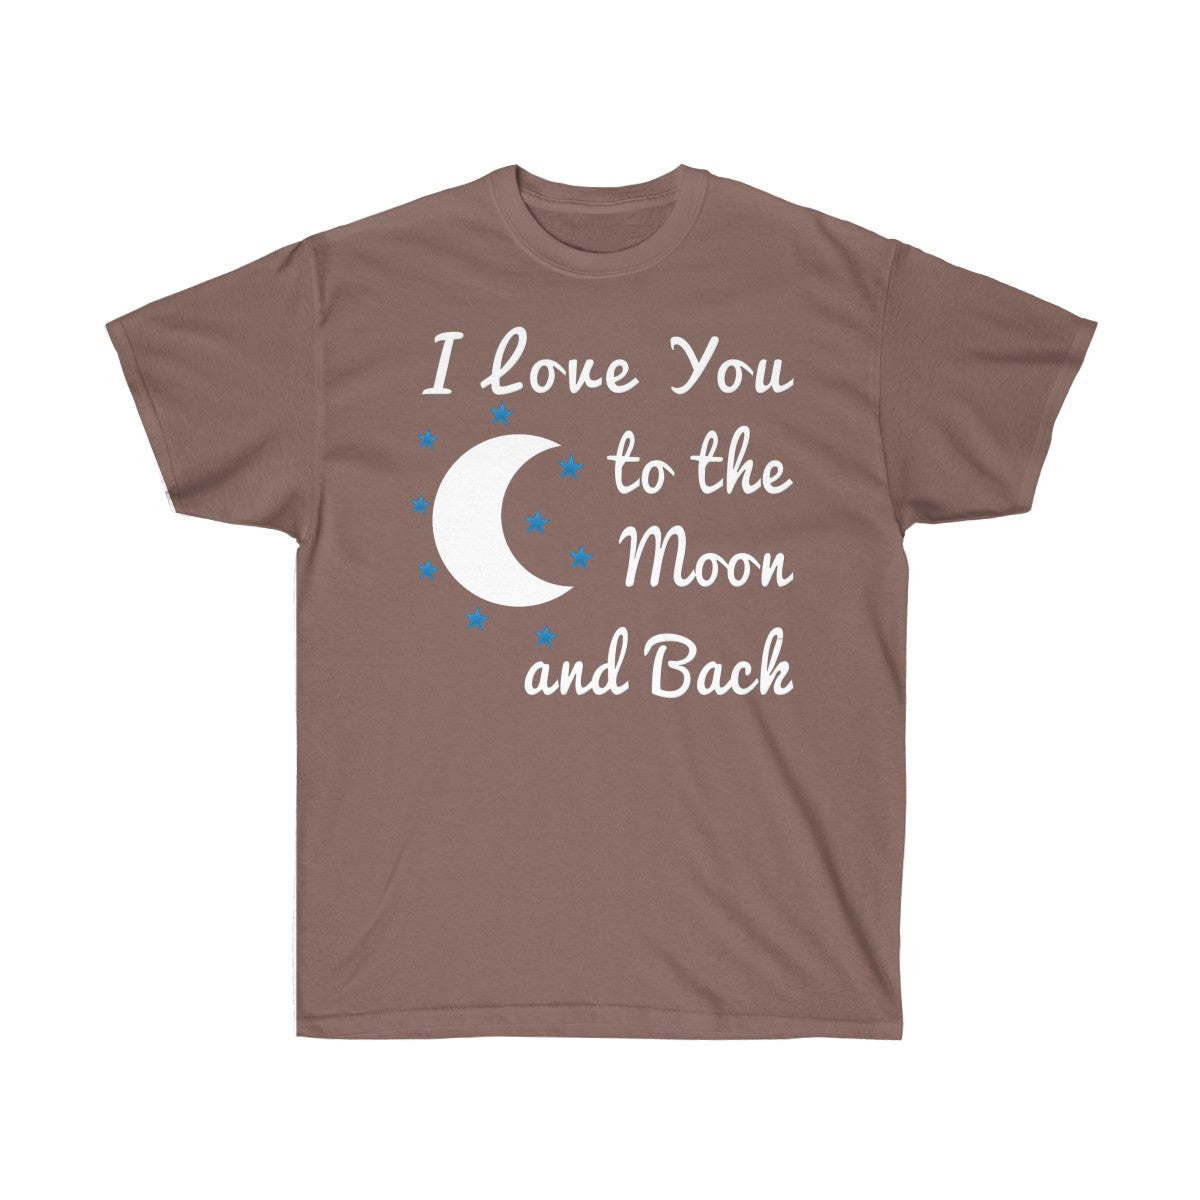 I Love You To The Moon & Back T-Shirt - Tees - Unisex Cotton T-Shirts